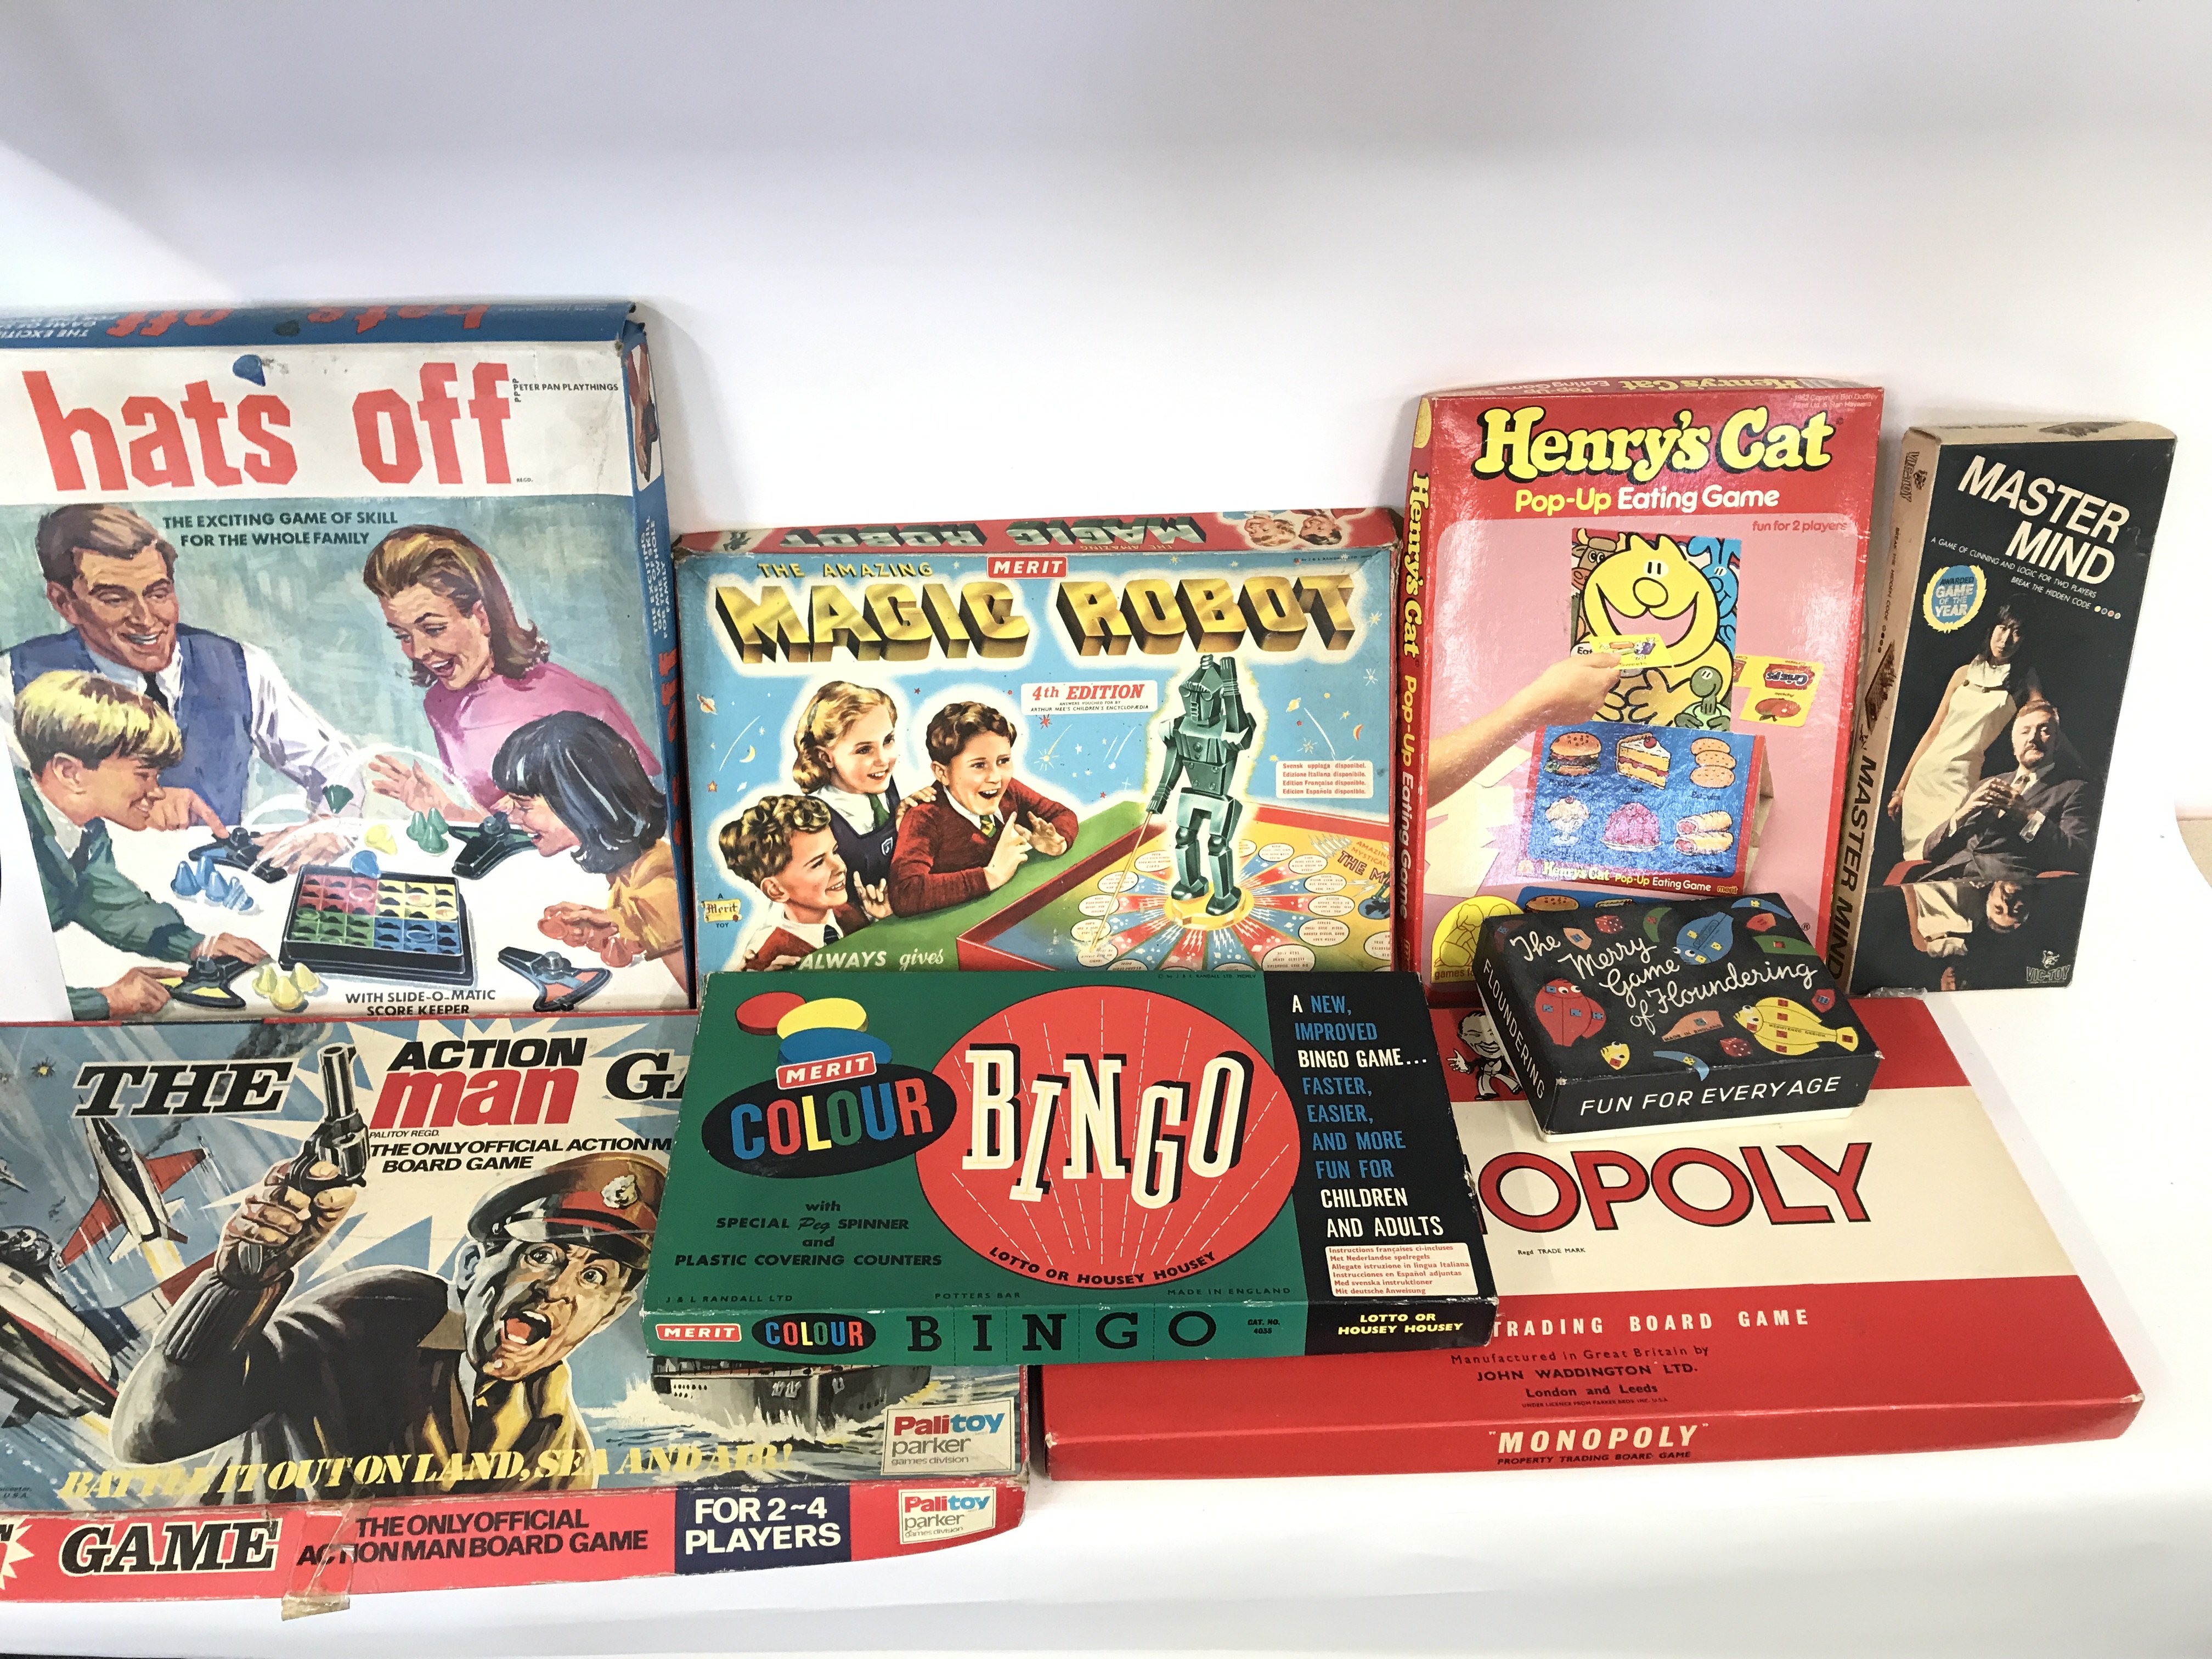 Collection of various board games including magic robot and the action man game.